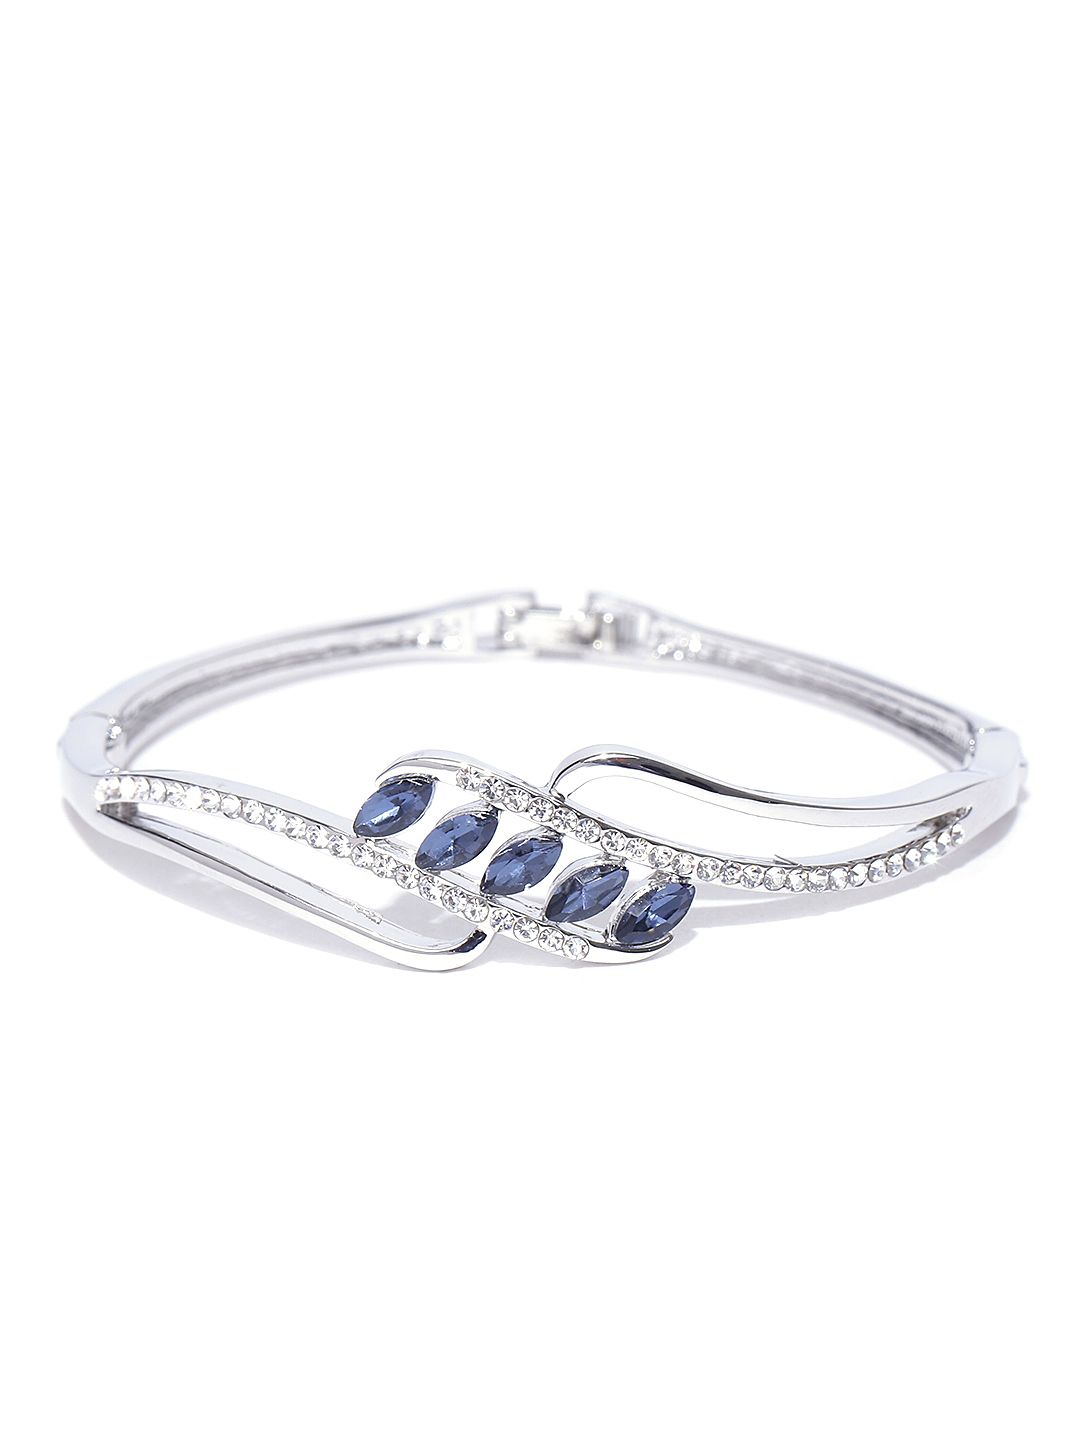 Jewels Galaxy Blue Platinum-Plated Handcrafted Bangle-Style Bracelet Price in India